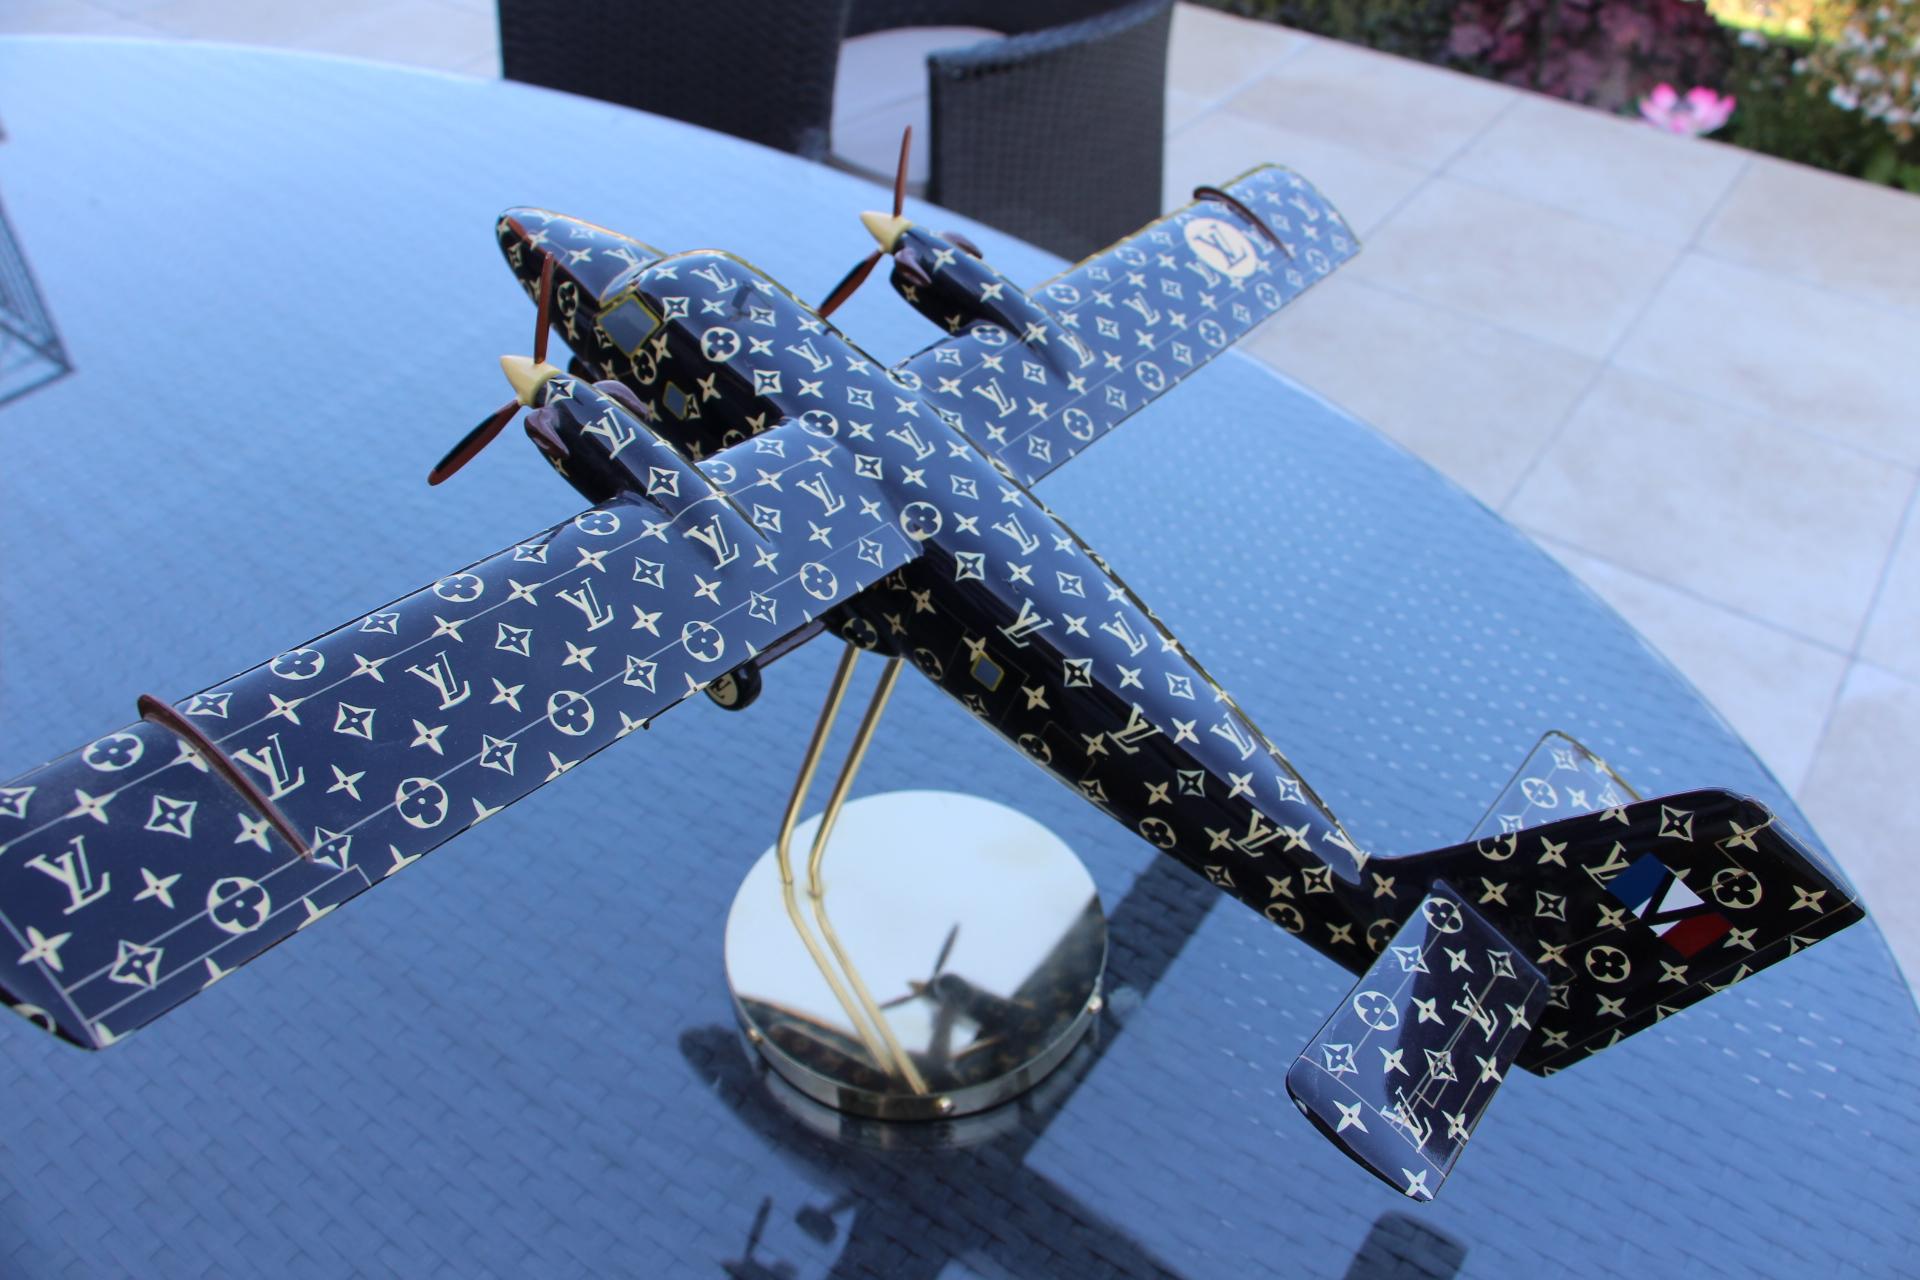 A French 1980 handmade wooden model airplane from a Louis Vuitton shop window display.
Beautiful brass stand.
This item is very unusual and a real top of the range piece of decoration.
It is a De Haviland Canada DHC 6-300 Twin Otter.